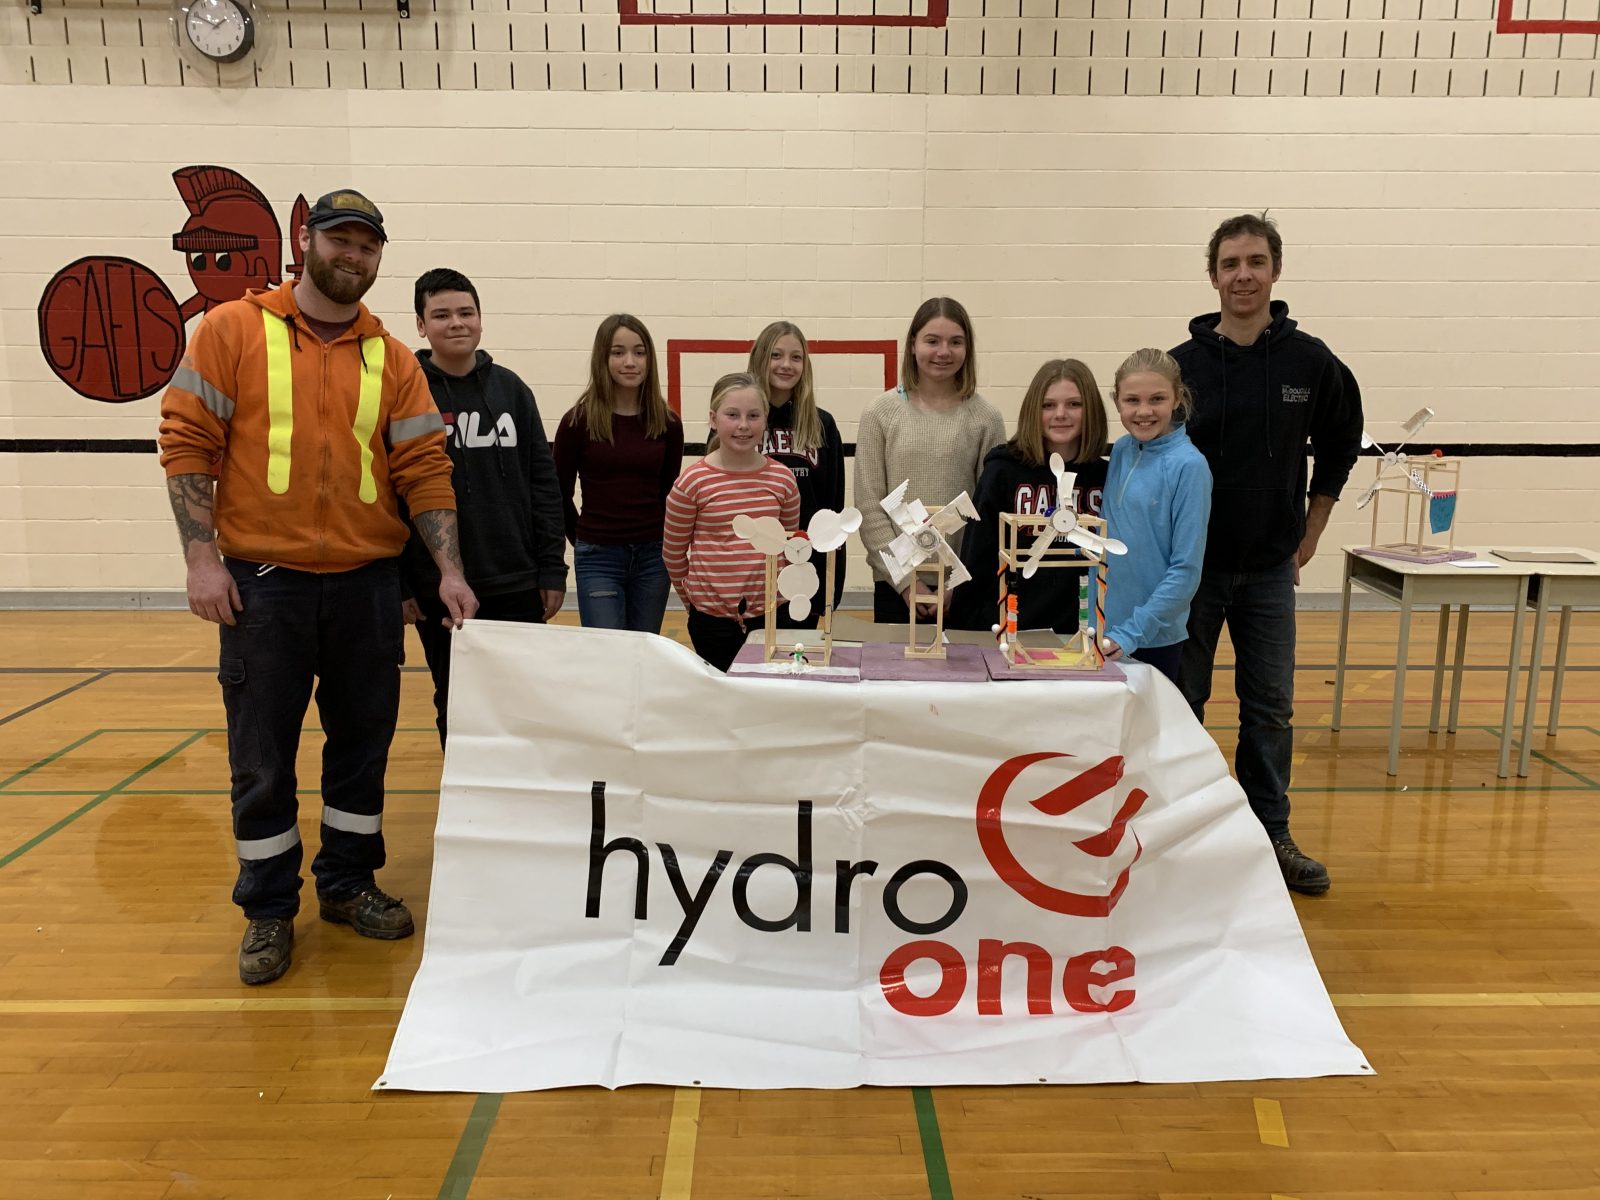 Wind turbine competition a breeze for Glengarry students